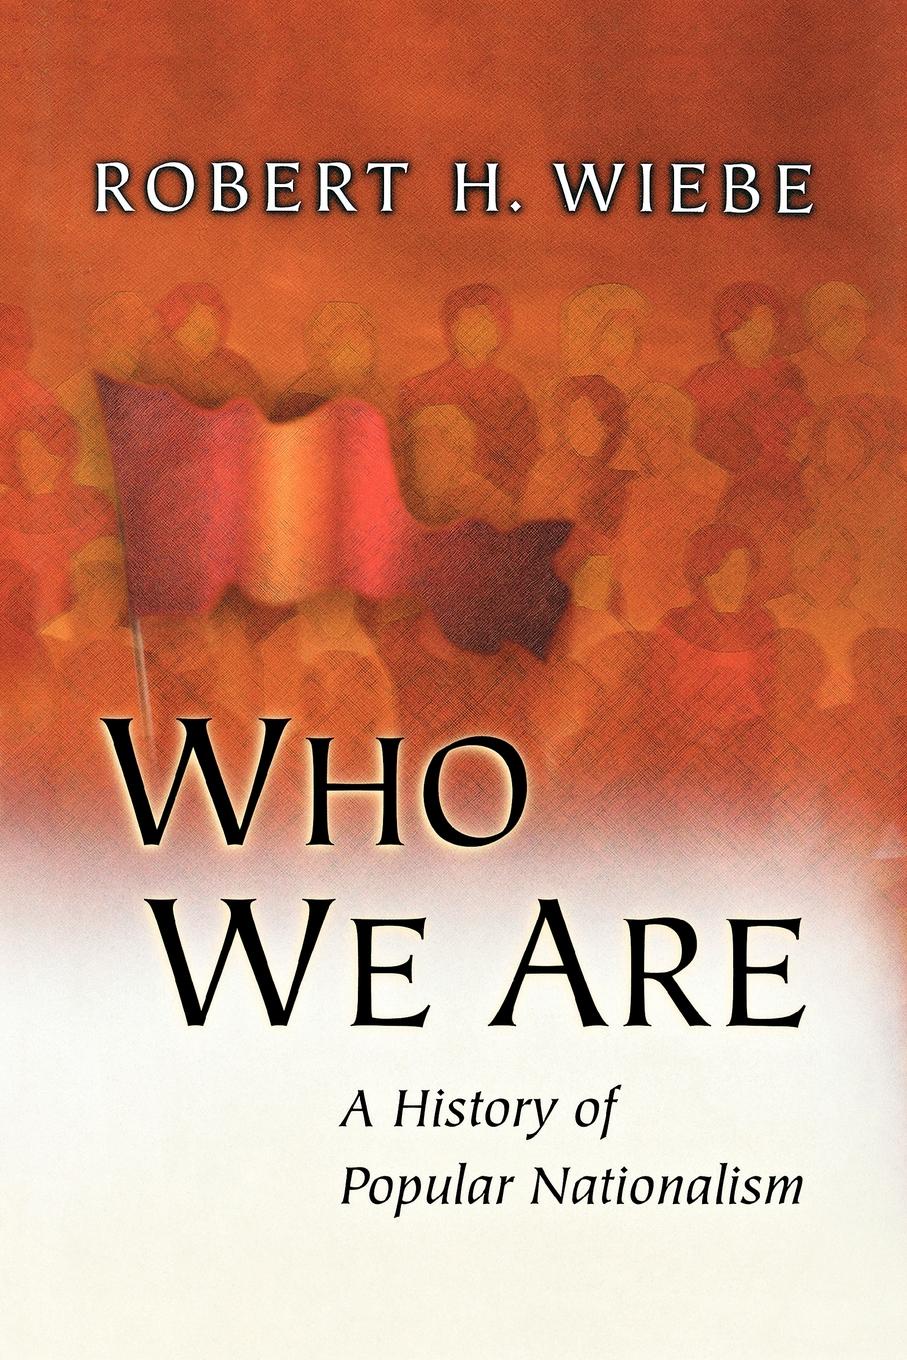 Who We Are. A History of Popular Nationalism